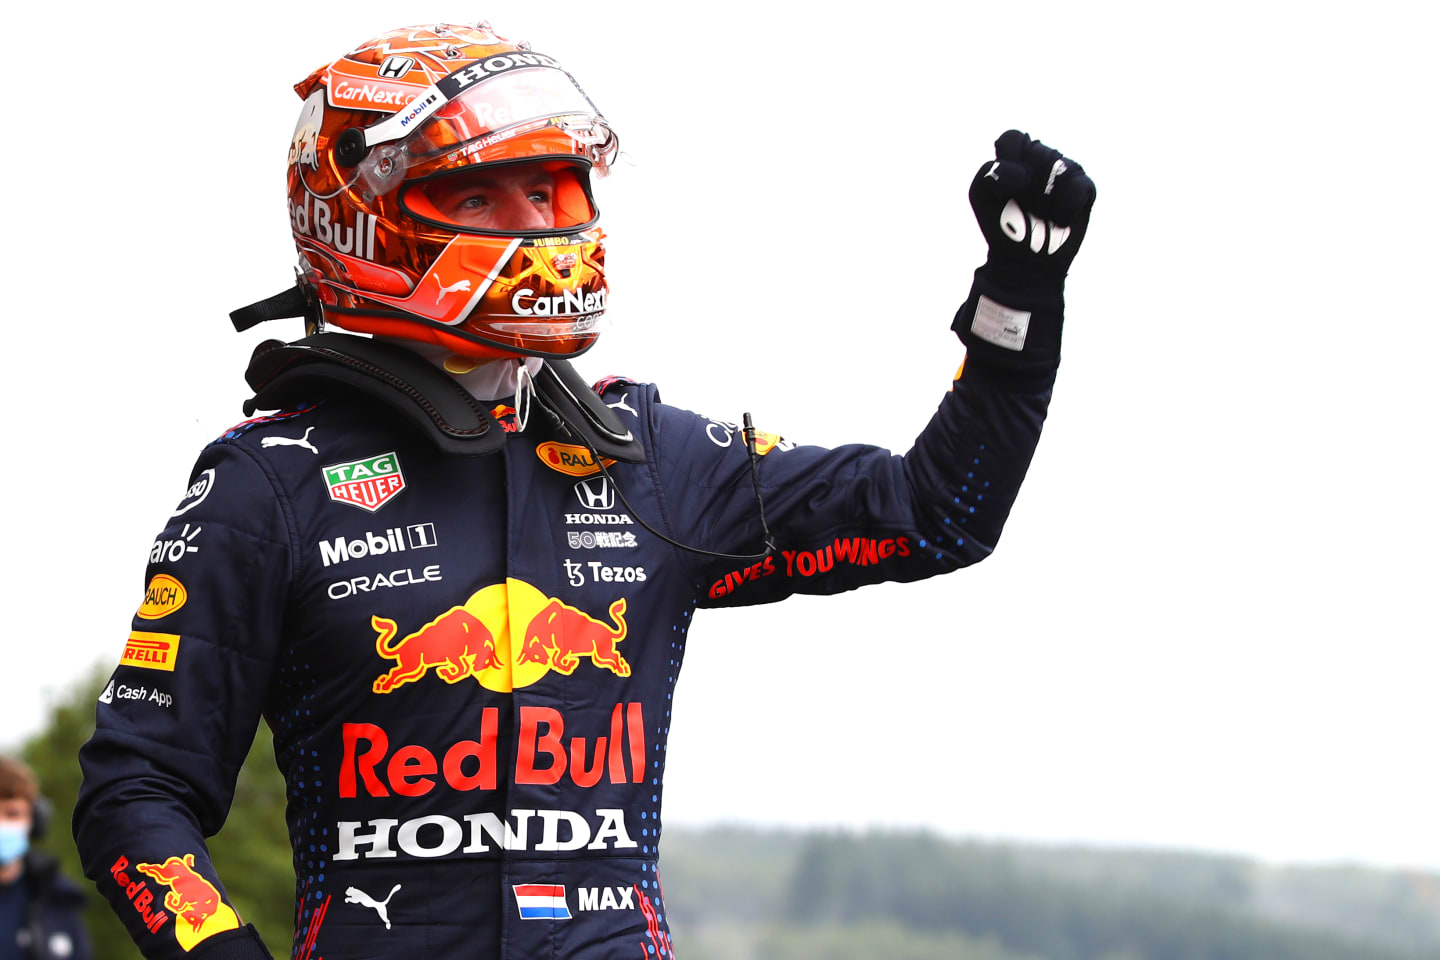 SPA, BELGIUM - AUGUST 28: Pole position qualifier Max Verstappen of Netherlands and Red Bull Racing celebrates in parc ferme during qualifying ahead of the F1 Grand Prix of Belgium at Circuit de Spa-Francorchamps on August 28, 2021 in Spa, Belgium. (Photo by Mark Thompson/Getty Images)